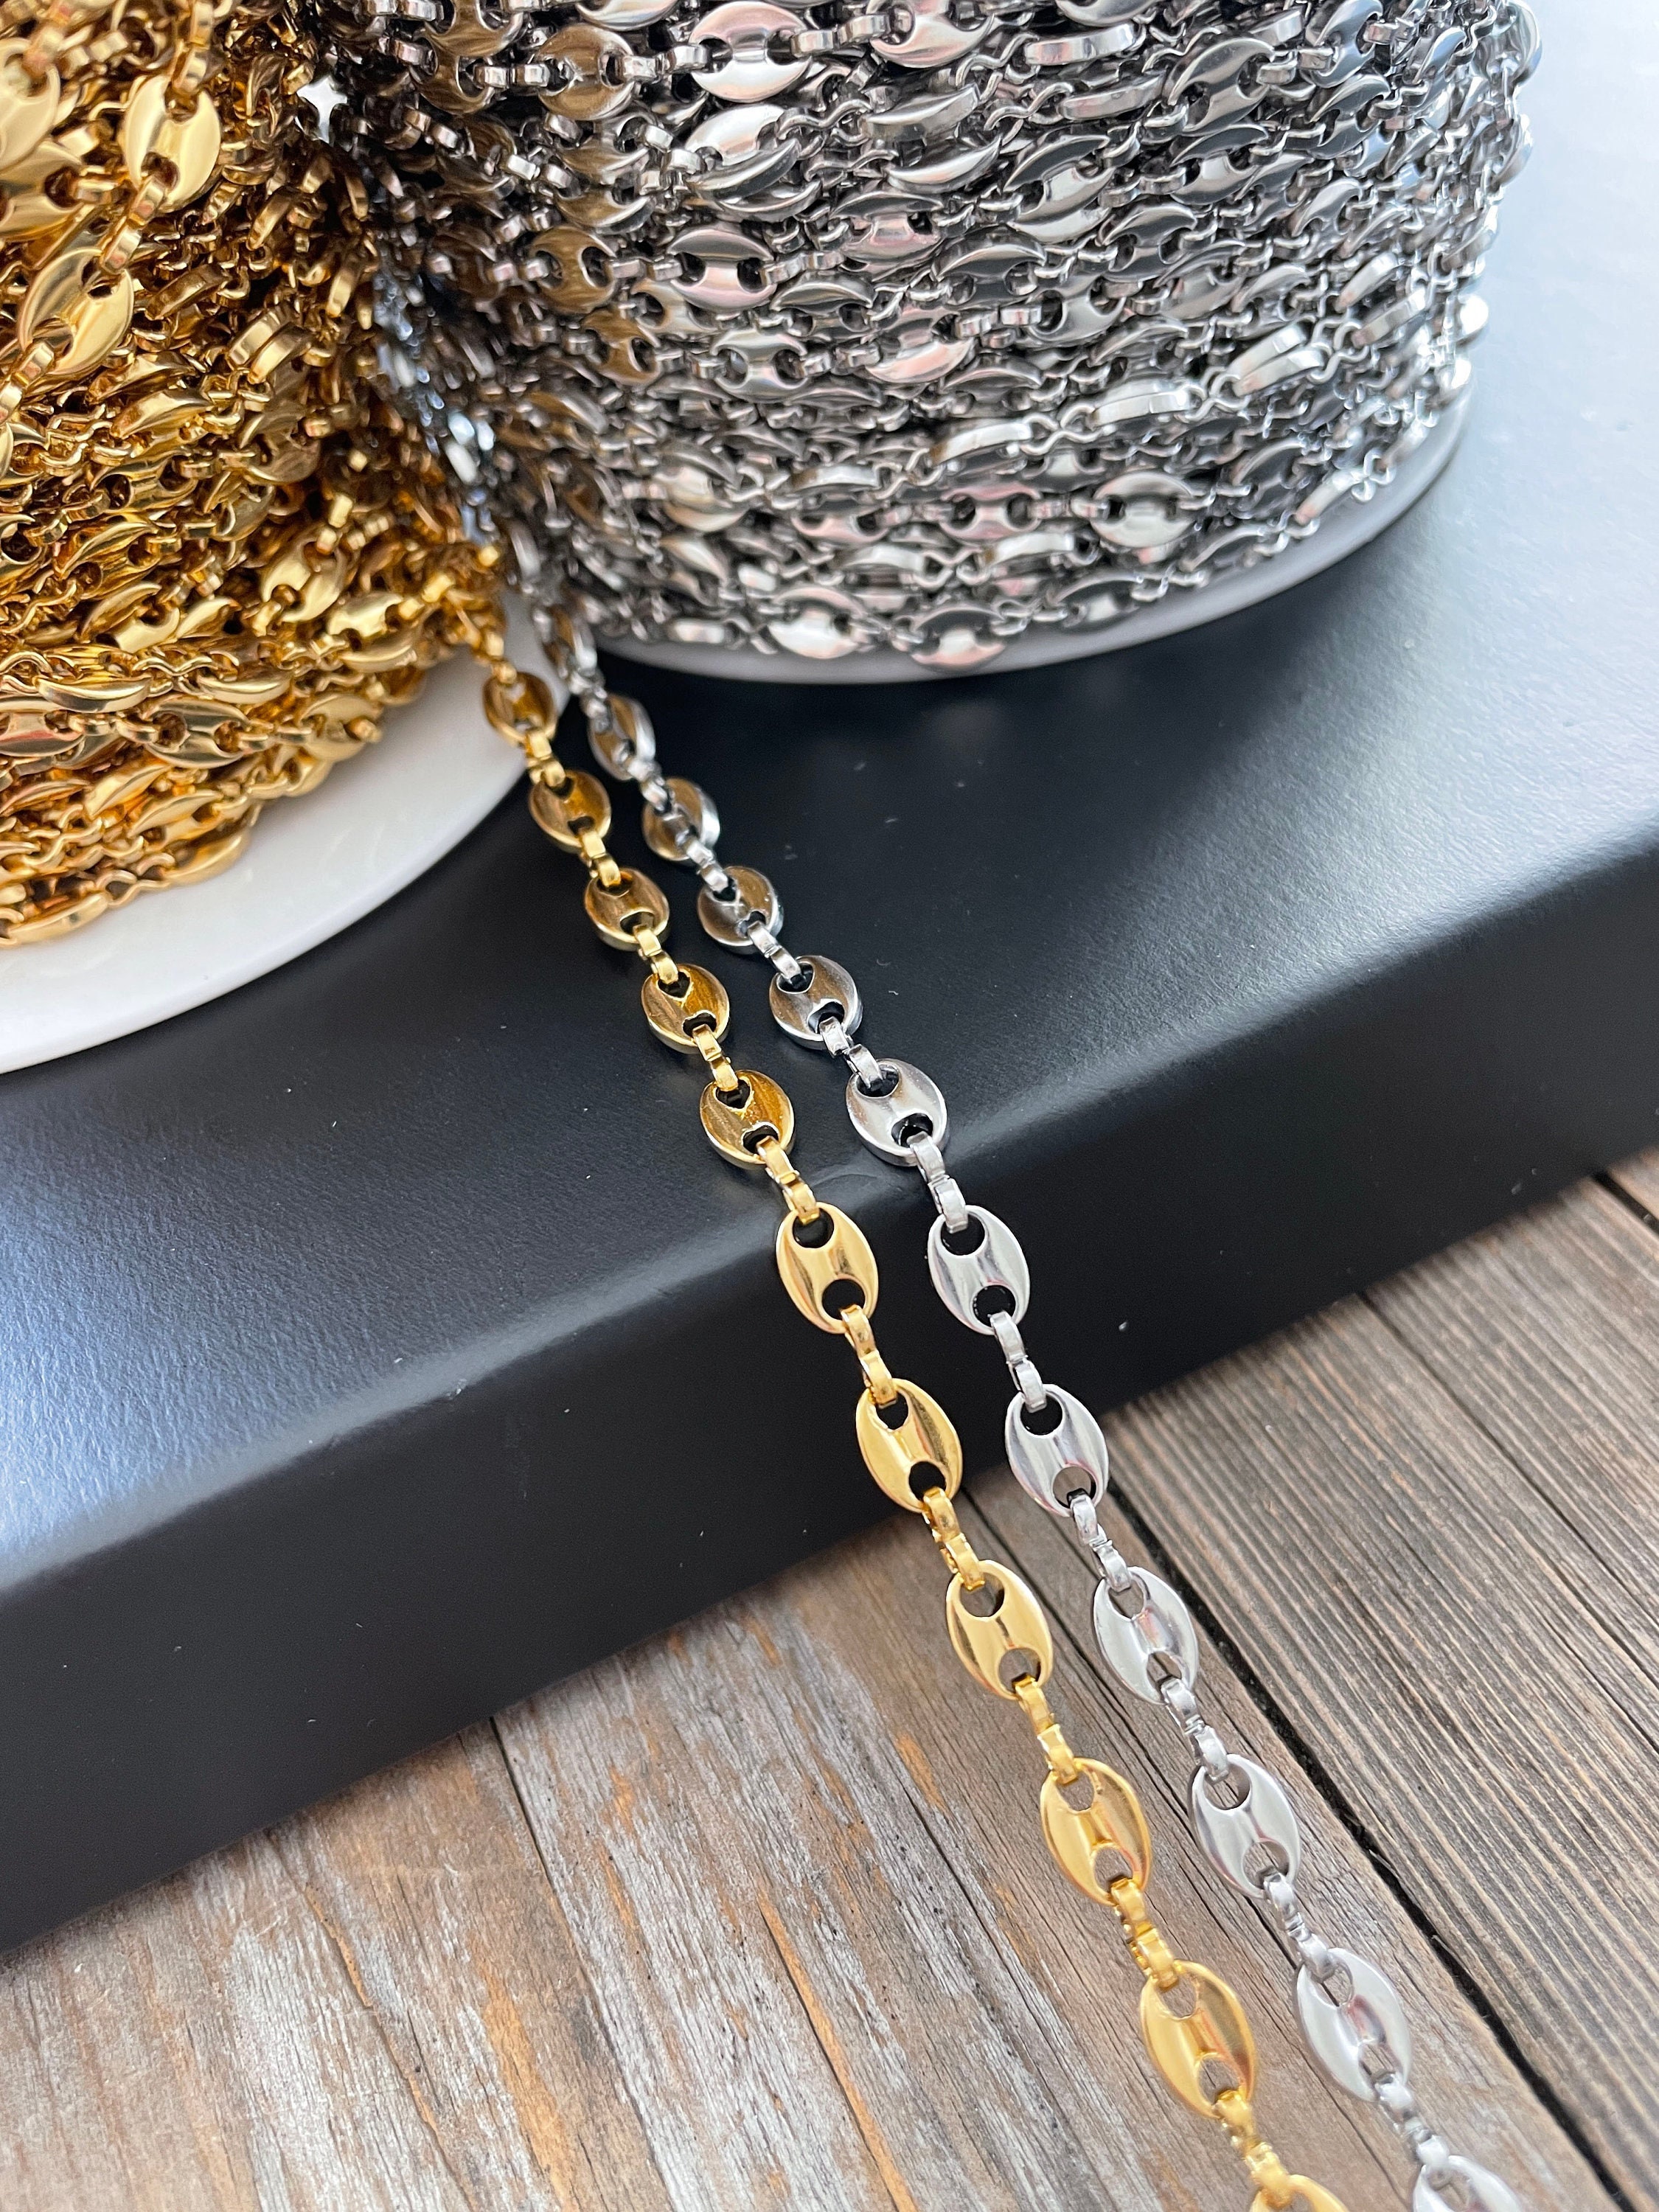 5 Silver Chain Link Necklaces 16 Inches 925 Sterling Silver Bulk Finished  Cable Necklaces Wholesale Chains 